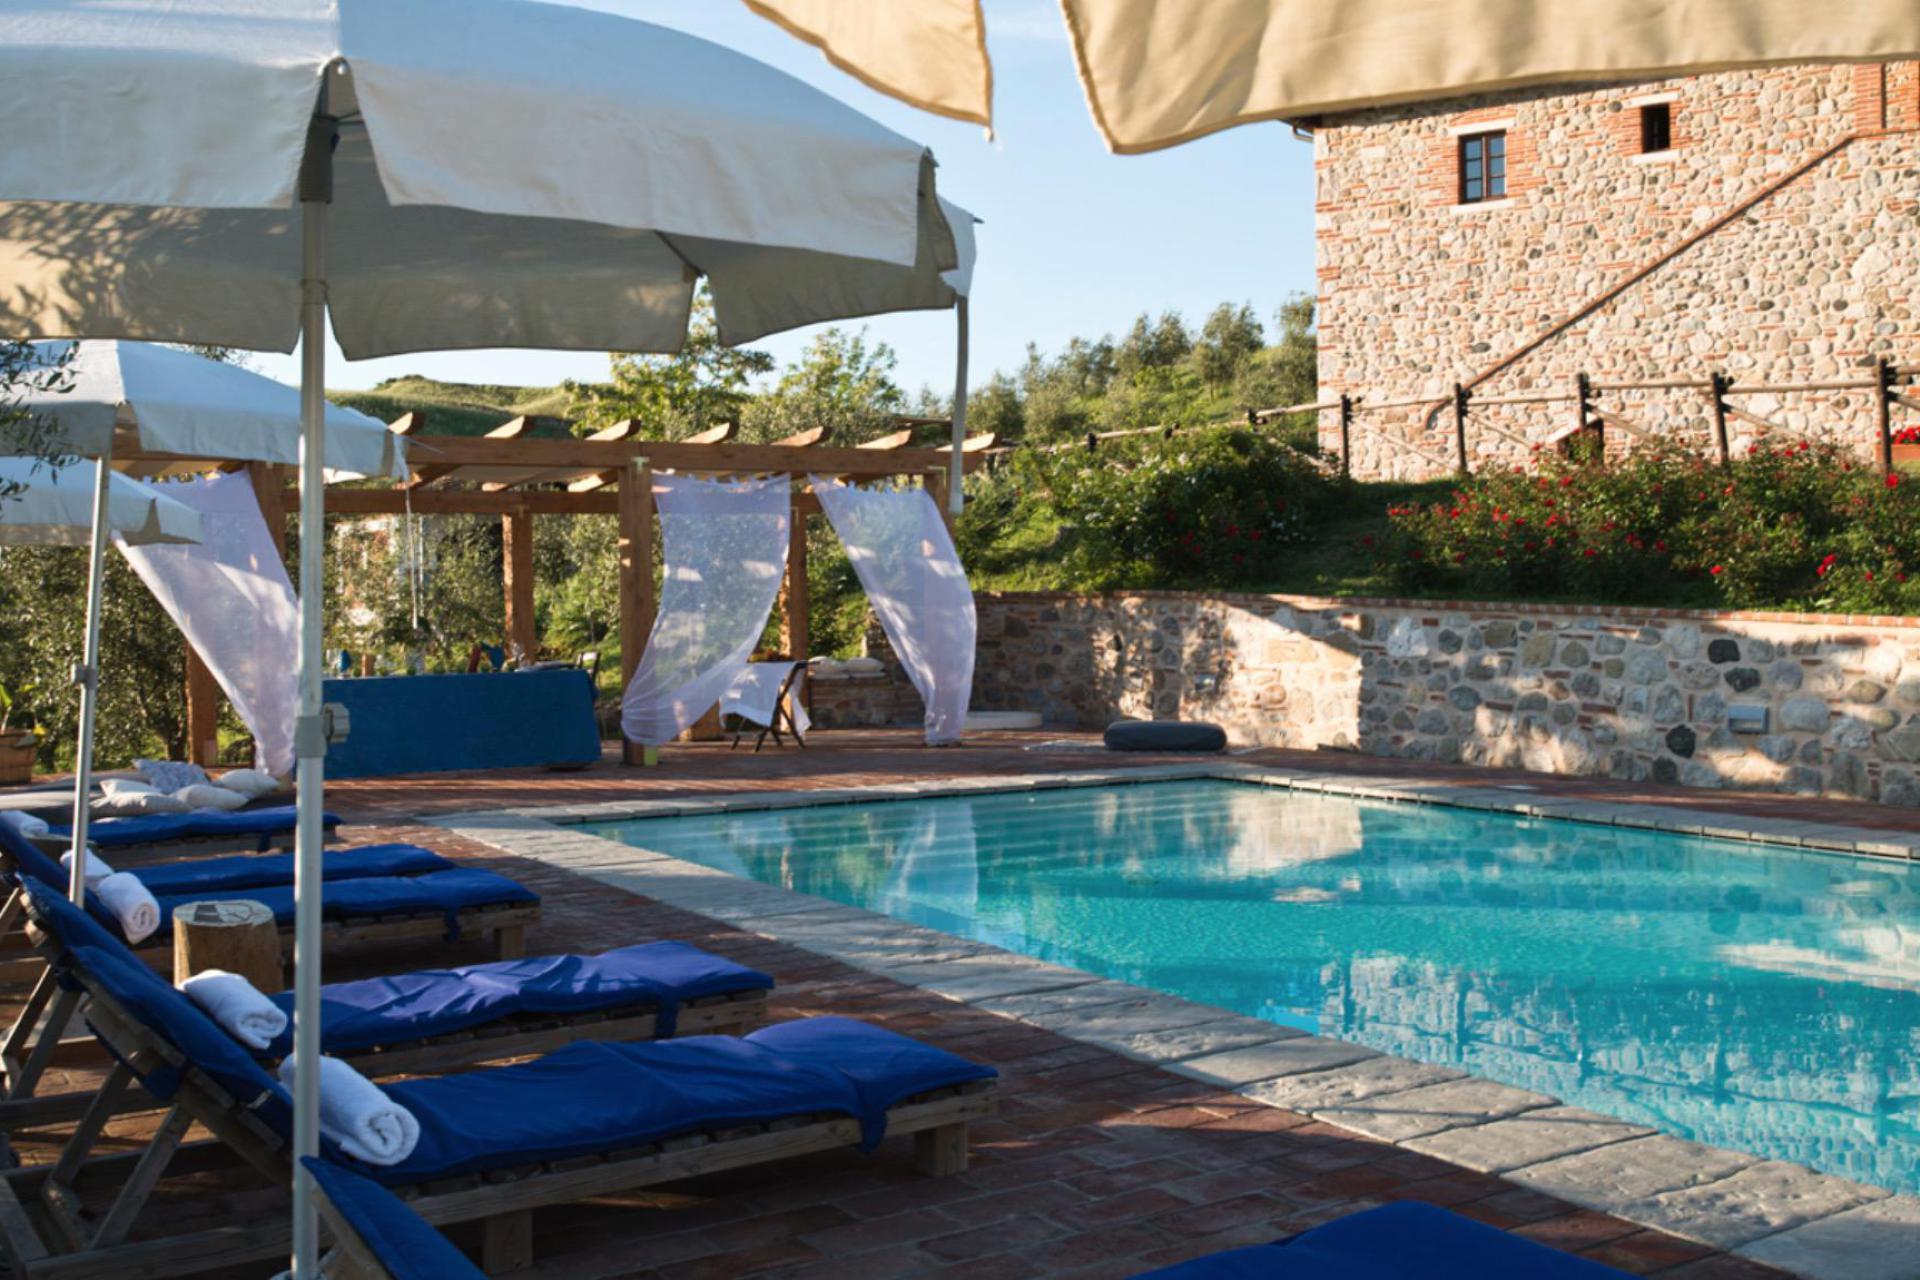 Cozy agriturismo with amazing views of Volterra, Tuscany